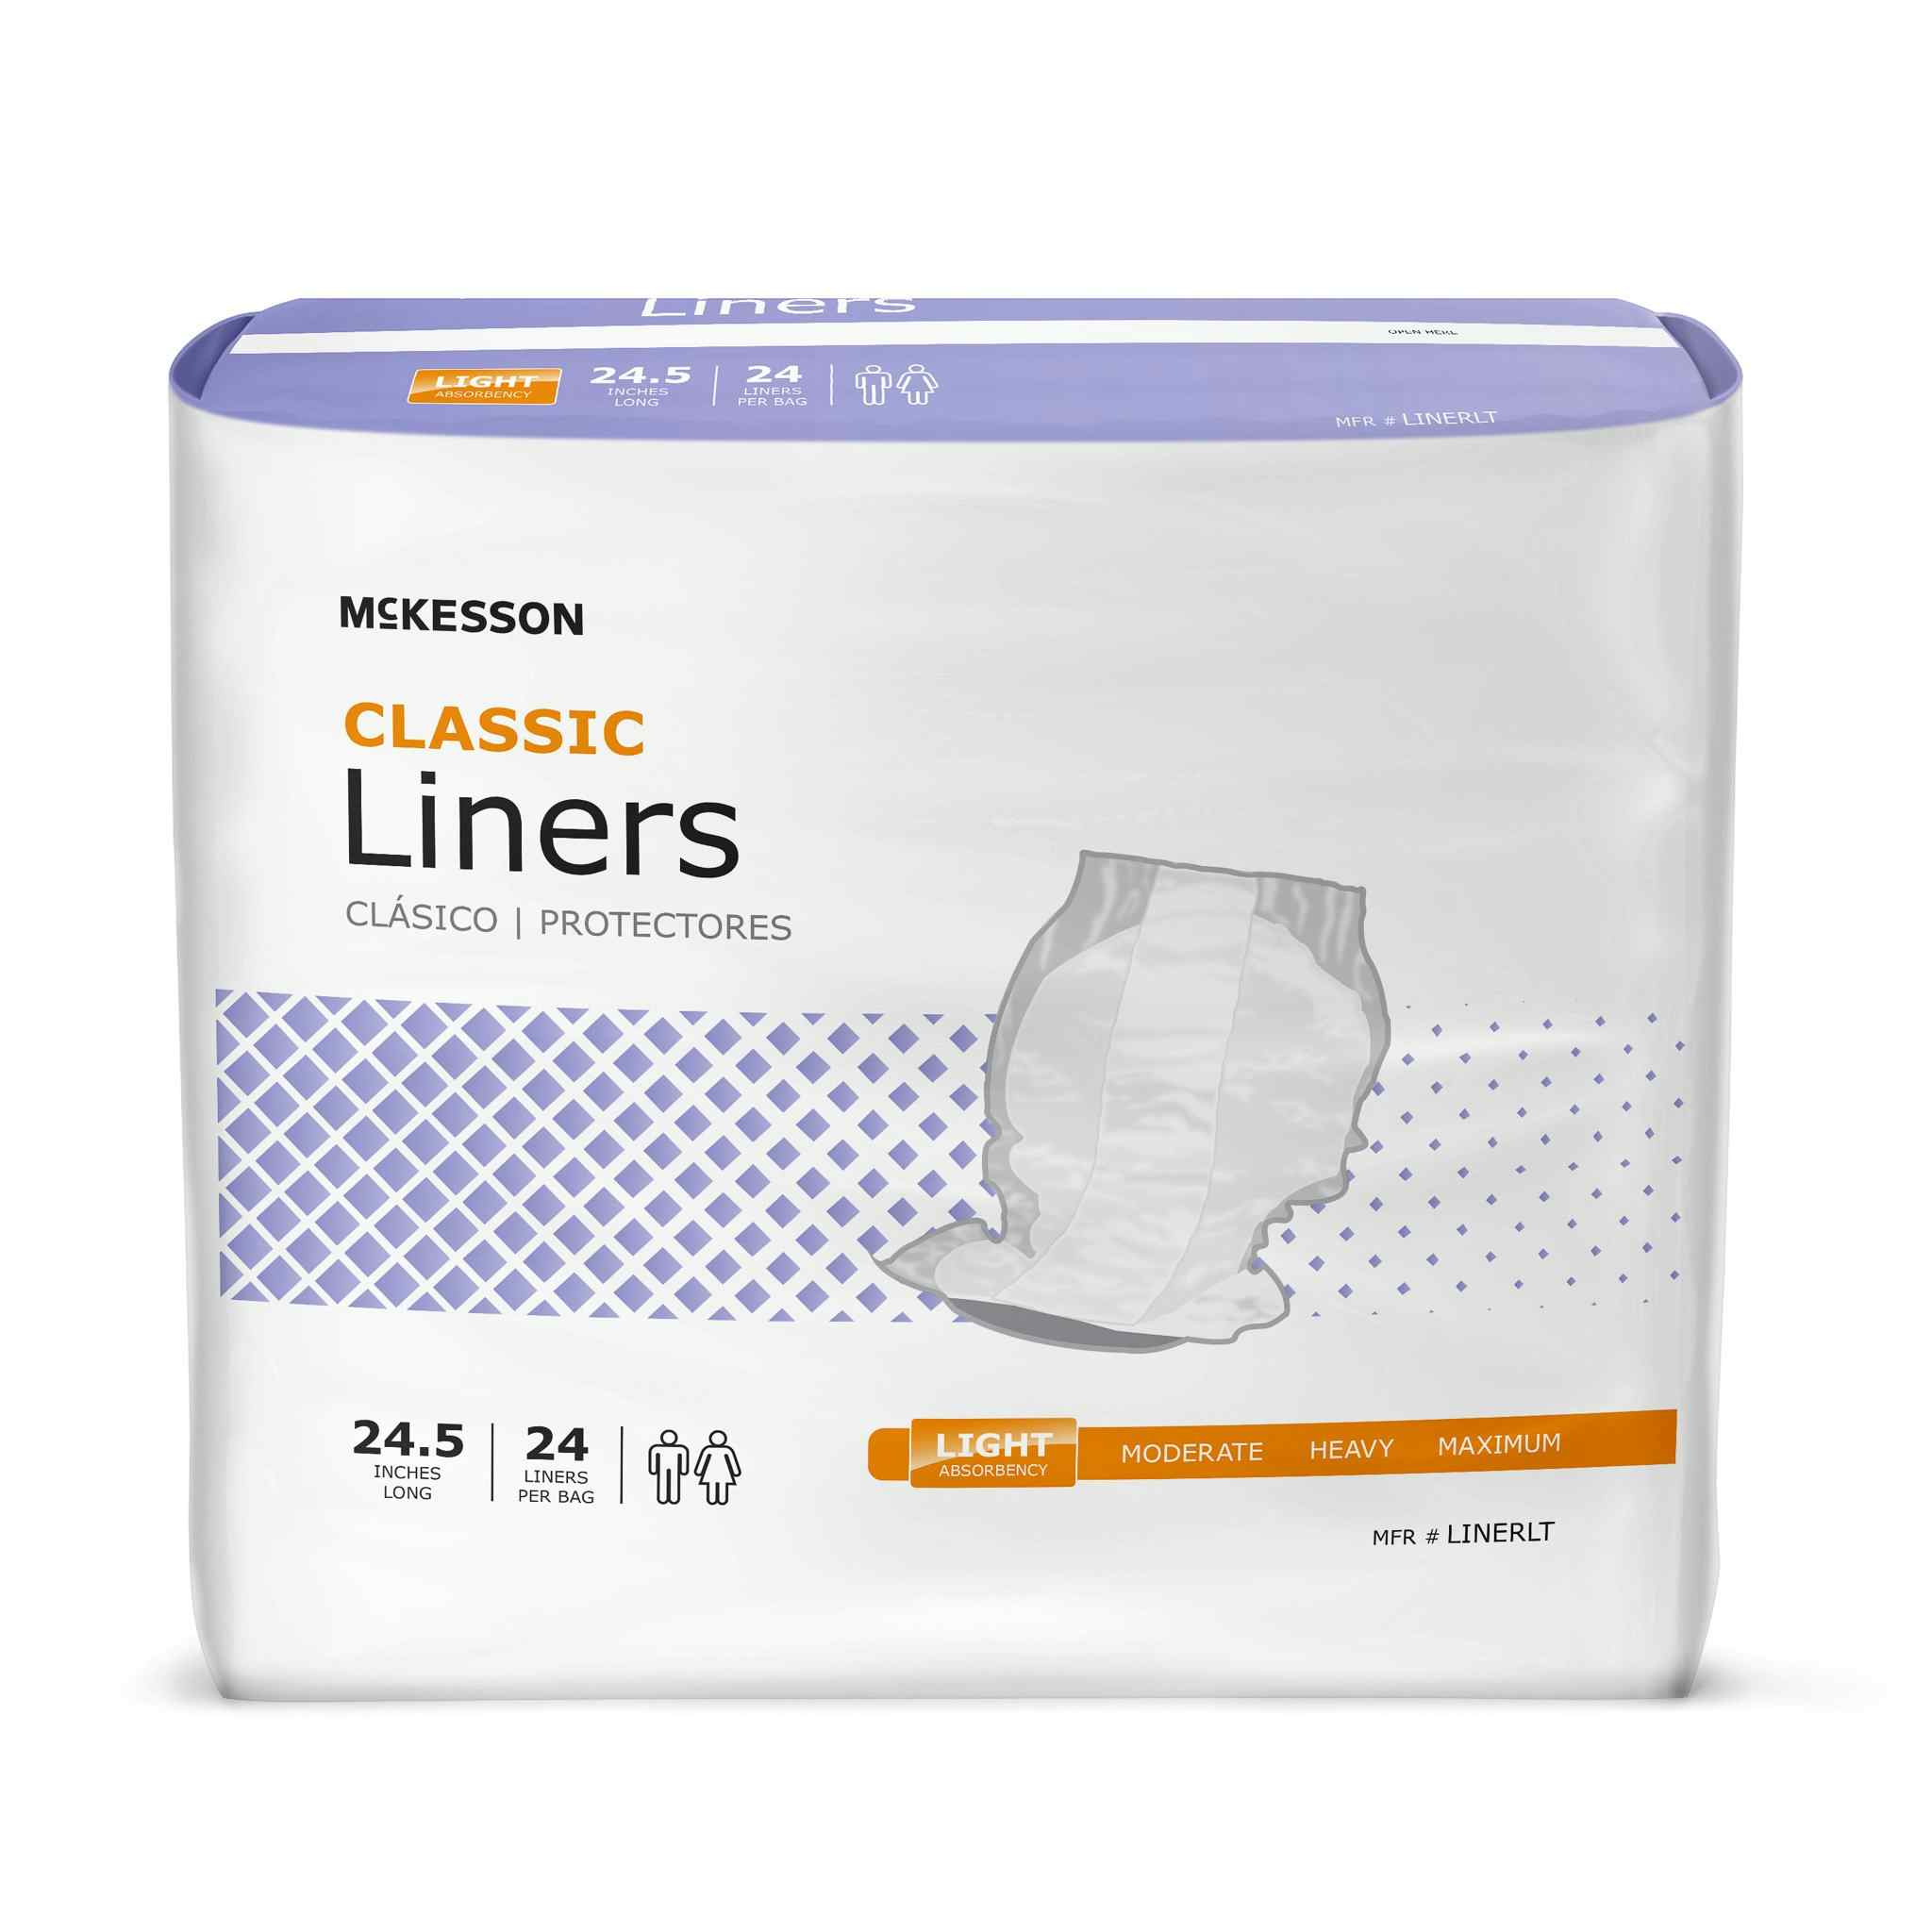 McKesson Classic Disposable Incontinence Liner, Light Absorbency, LINERLT, One Size Fits Most - Bag of 24